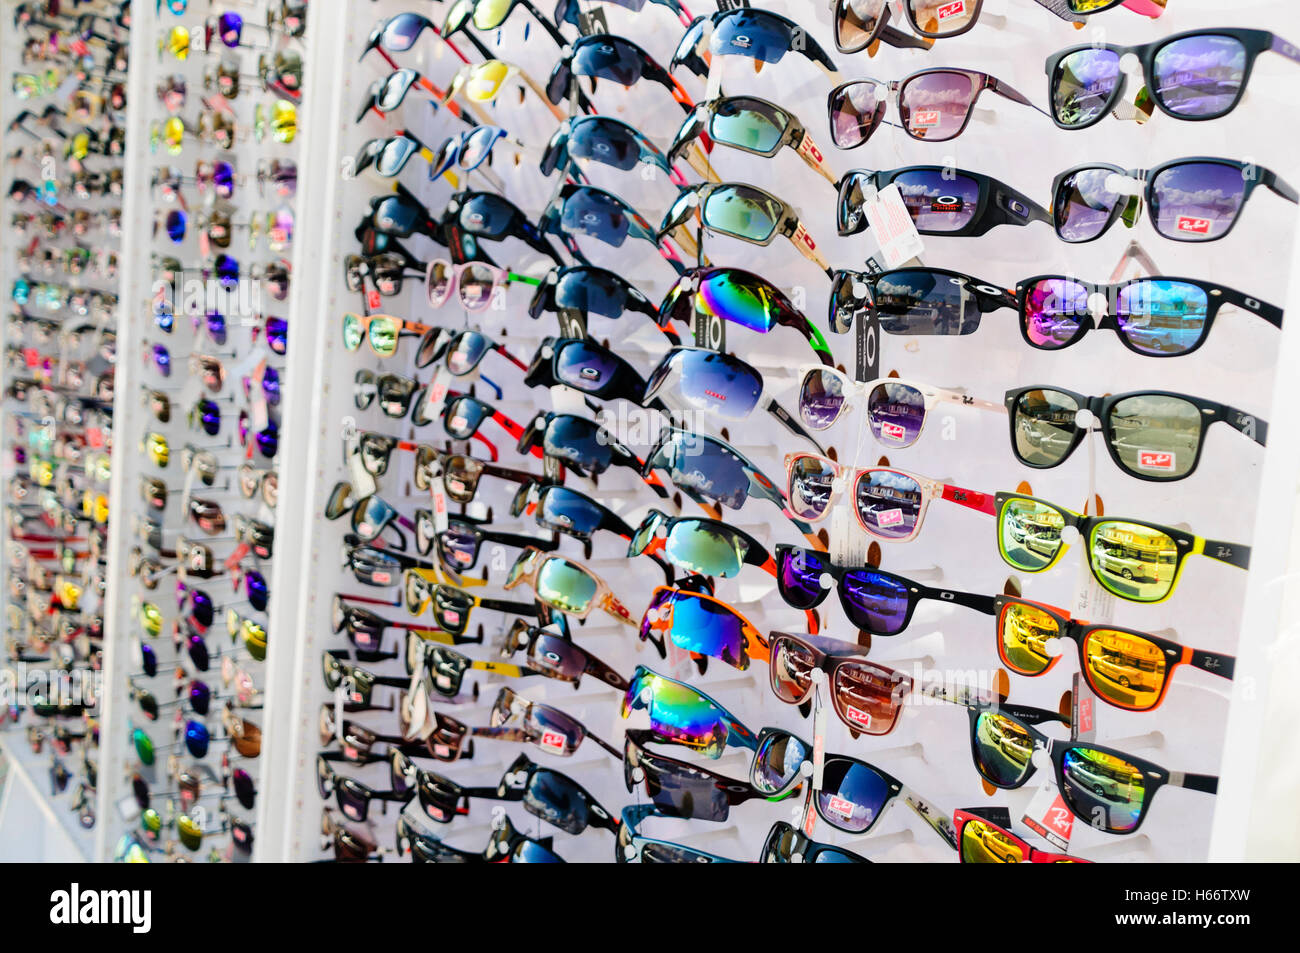 Shop in Turkey selling counterfeit Rayban and Oakley sunglasses Stock Photo  - Alamy